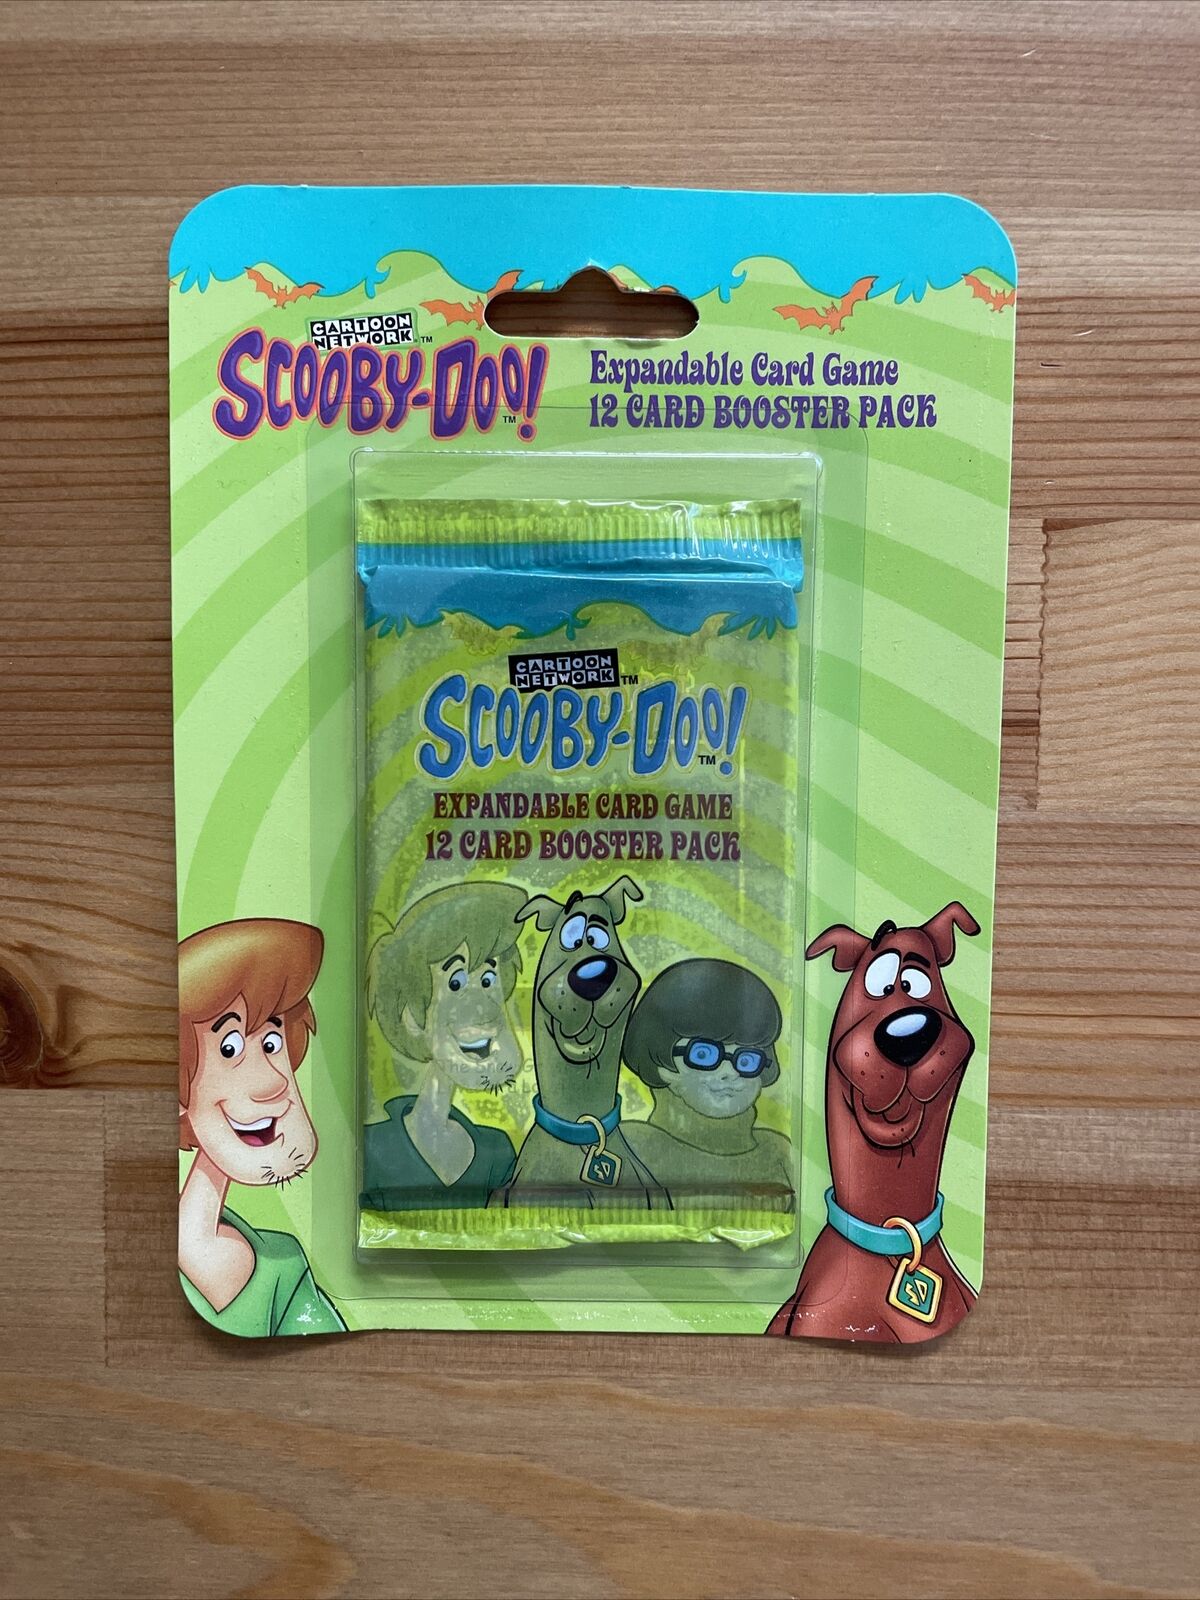 Scooby-Doo Expandable Card Game CCG Sealed Blister Booster Pack 2000 Bicycle